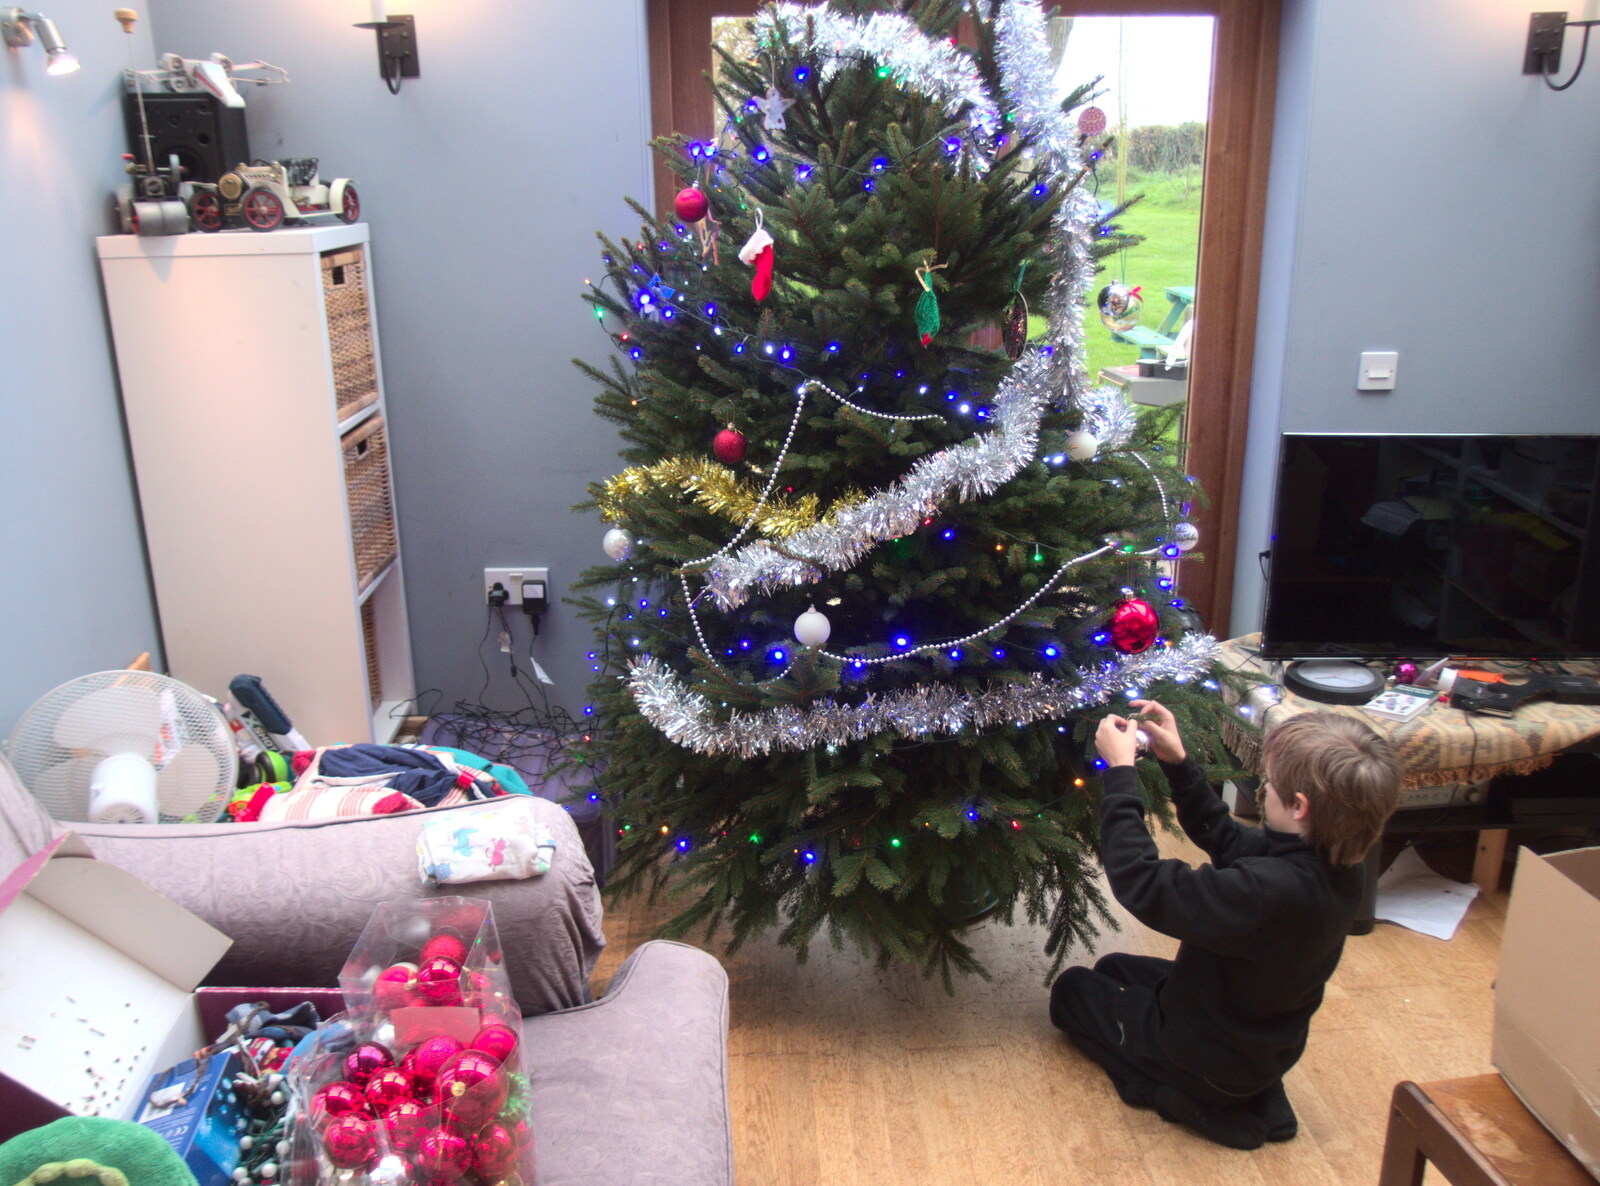 The tree is up as Harry helps to decorate from Frosty Rides and a Christmas Tree, Diss Garden Centre, Diss, Norfolk - 29th November 2020